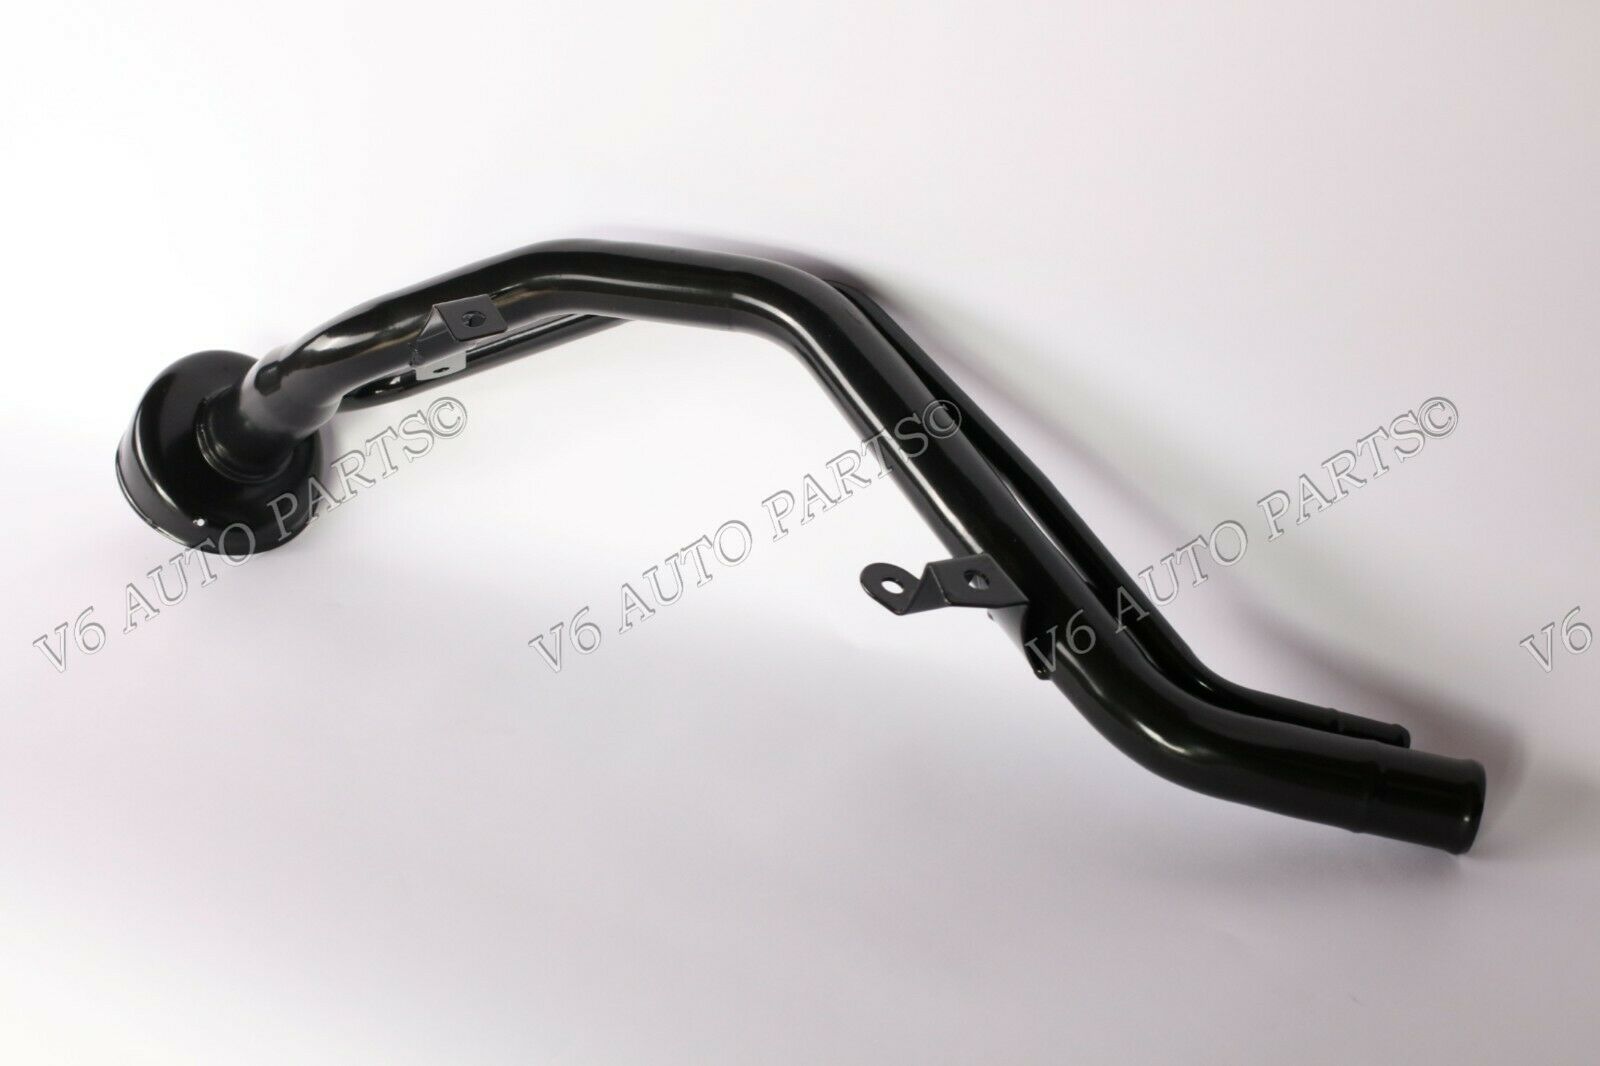 B075D255XD MICRA K11 NEW 1993 TO 2002 1.0 1.3 MARCH PETROL FUEL TANK FILLER NECK METAL PIPE